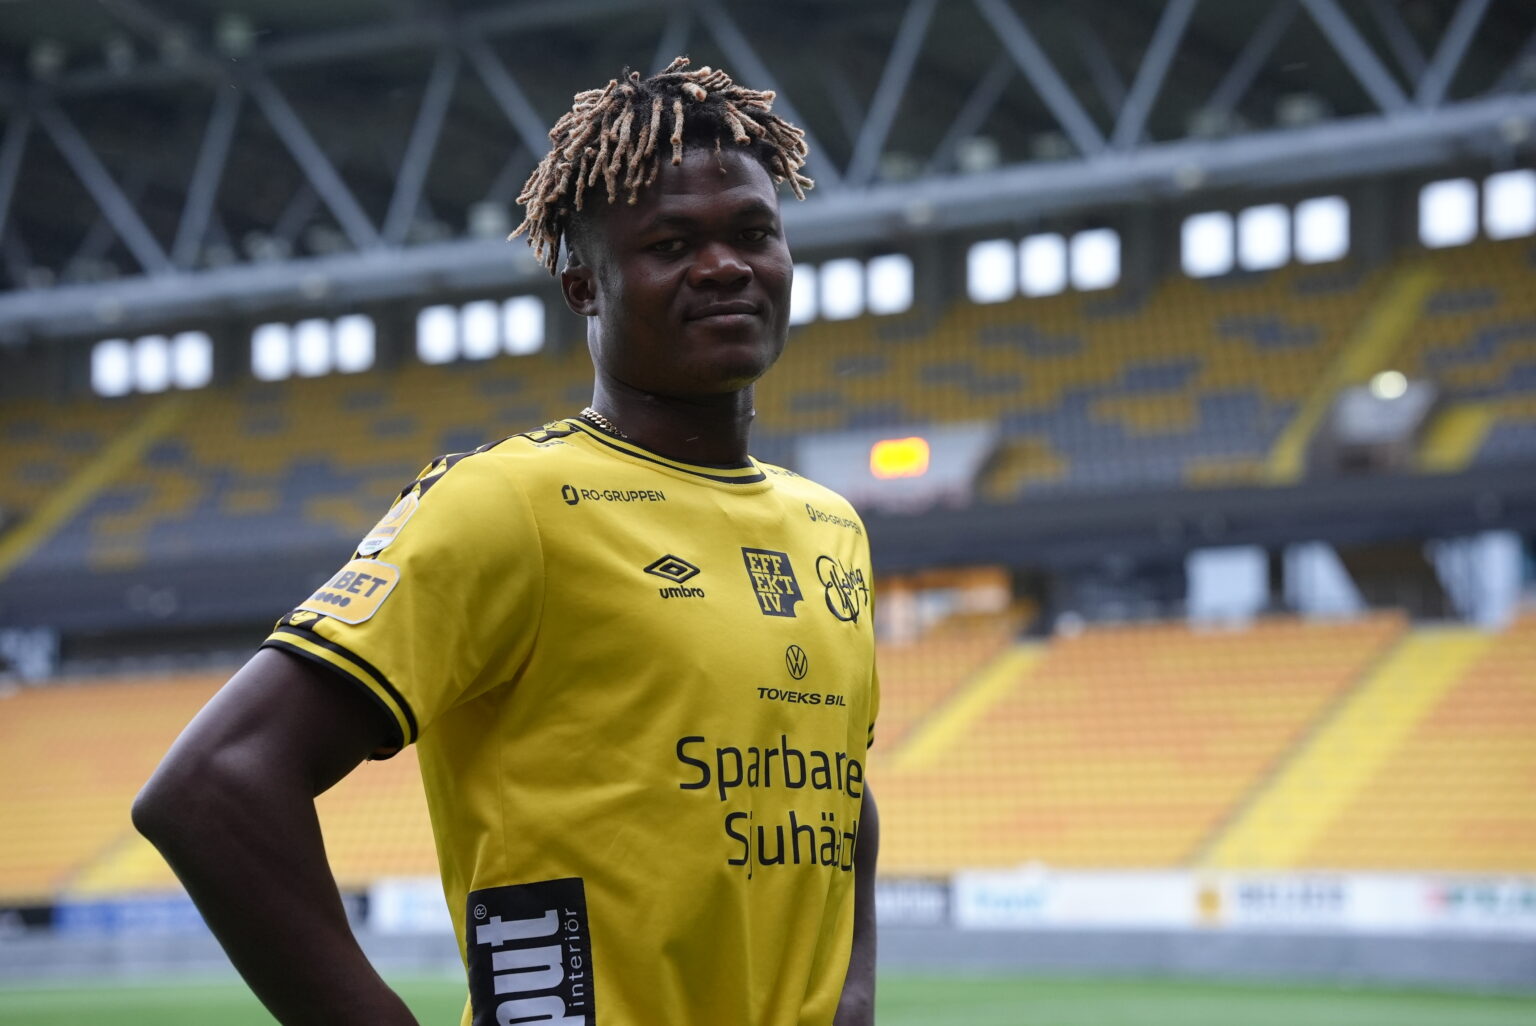 I started following Elfsborg when they signed my former teammate Michael Baidoo - Terry Yegbe